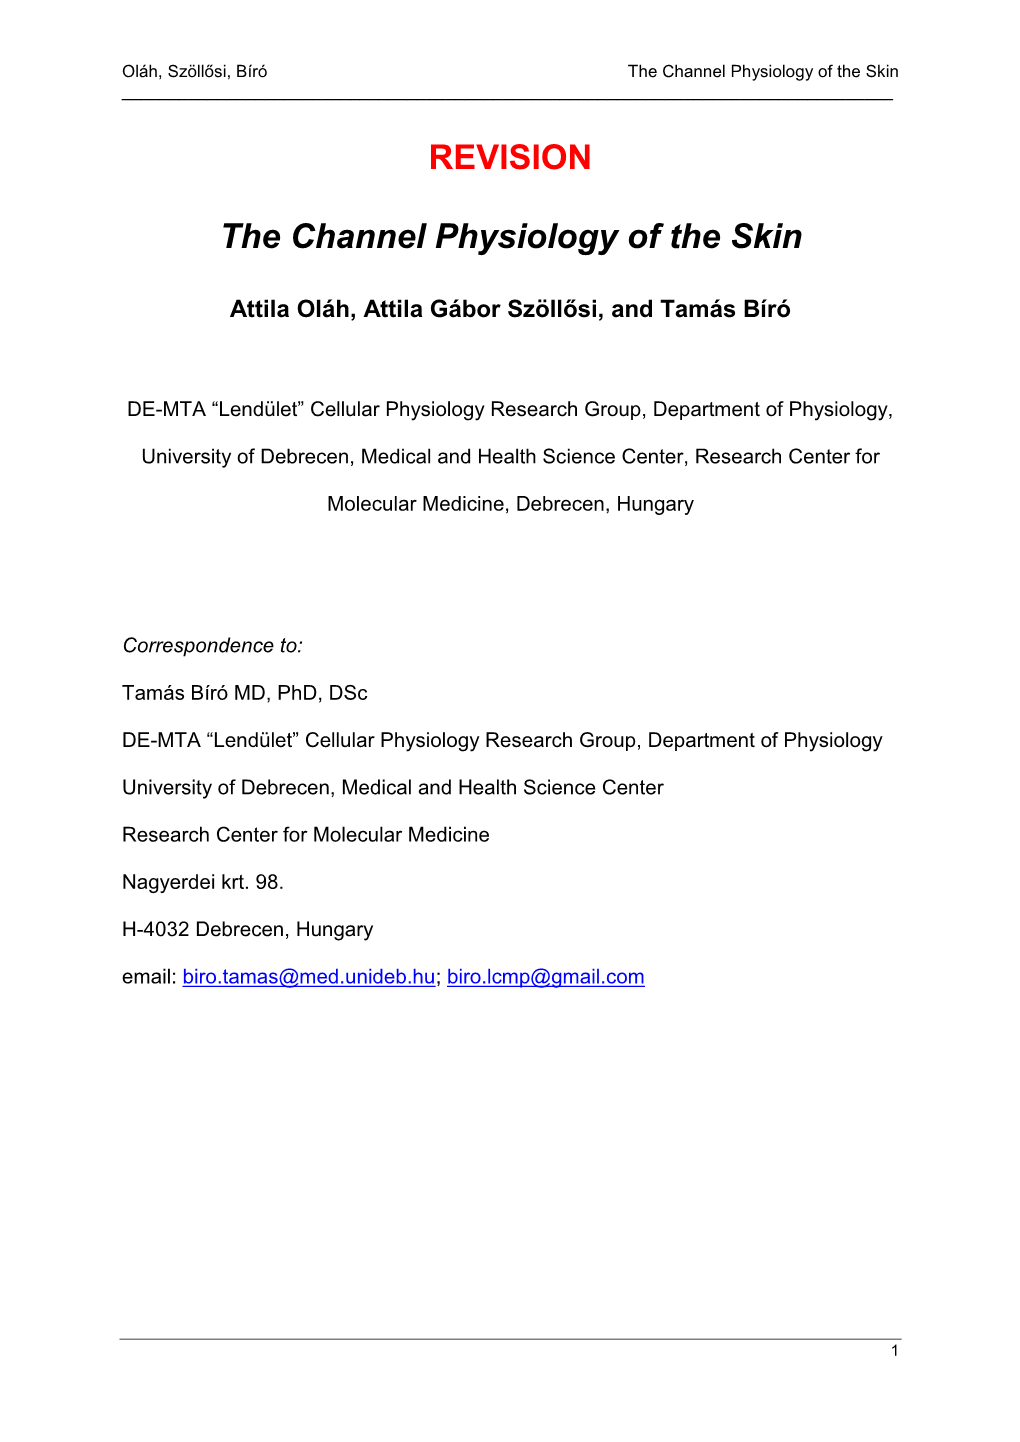 REVISION the Channel Physiology of the Skin